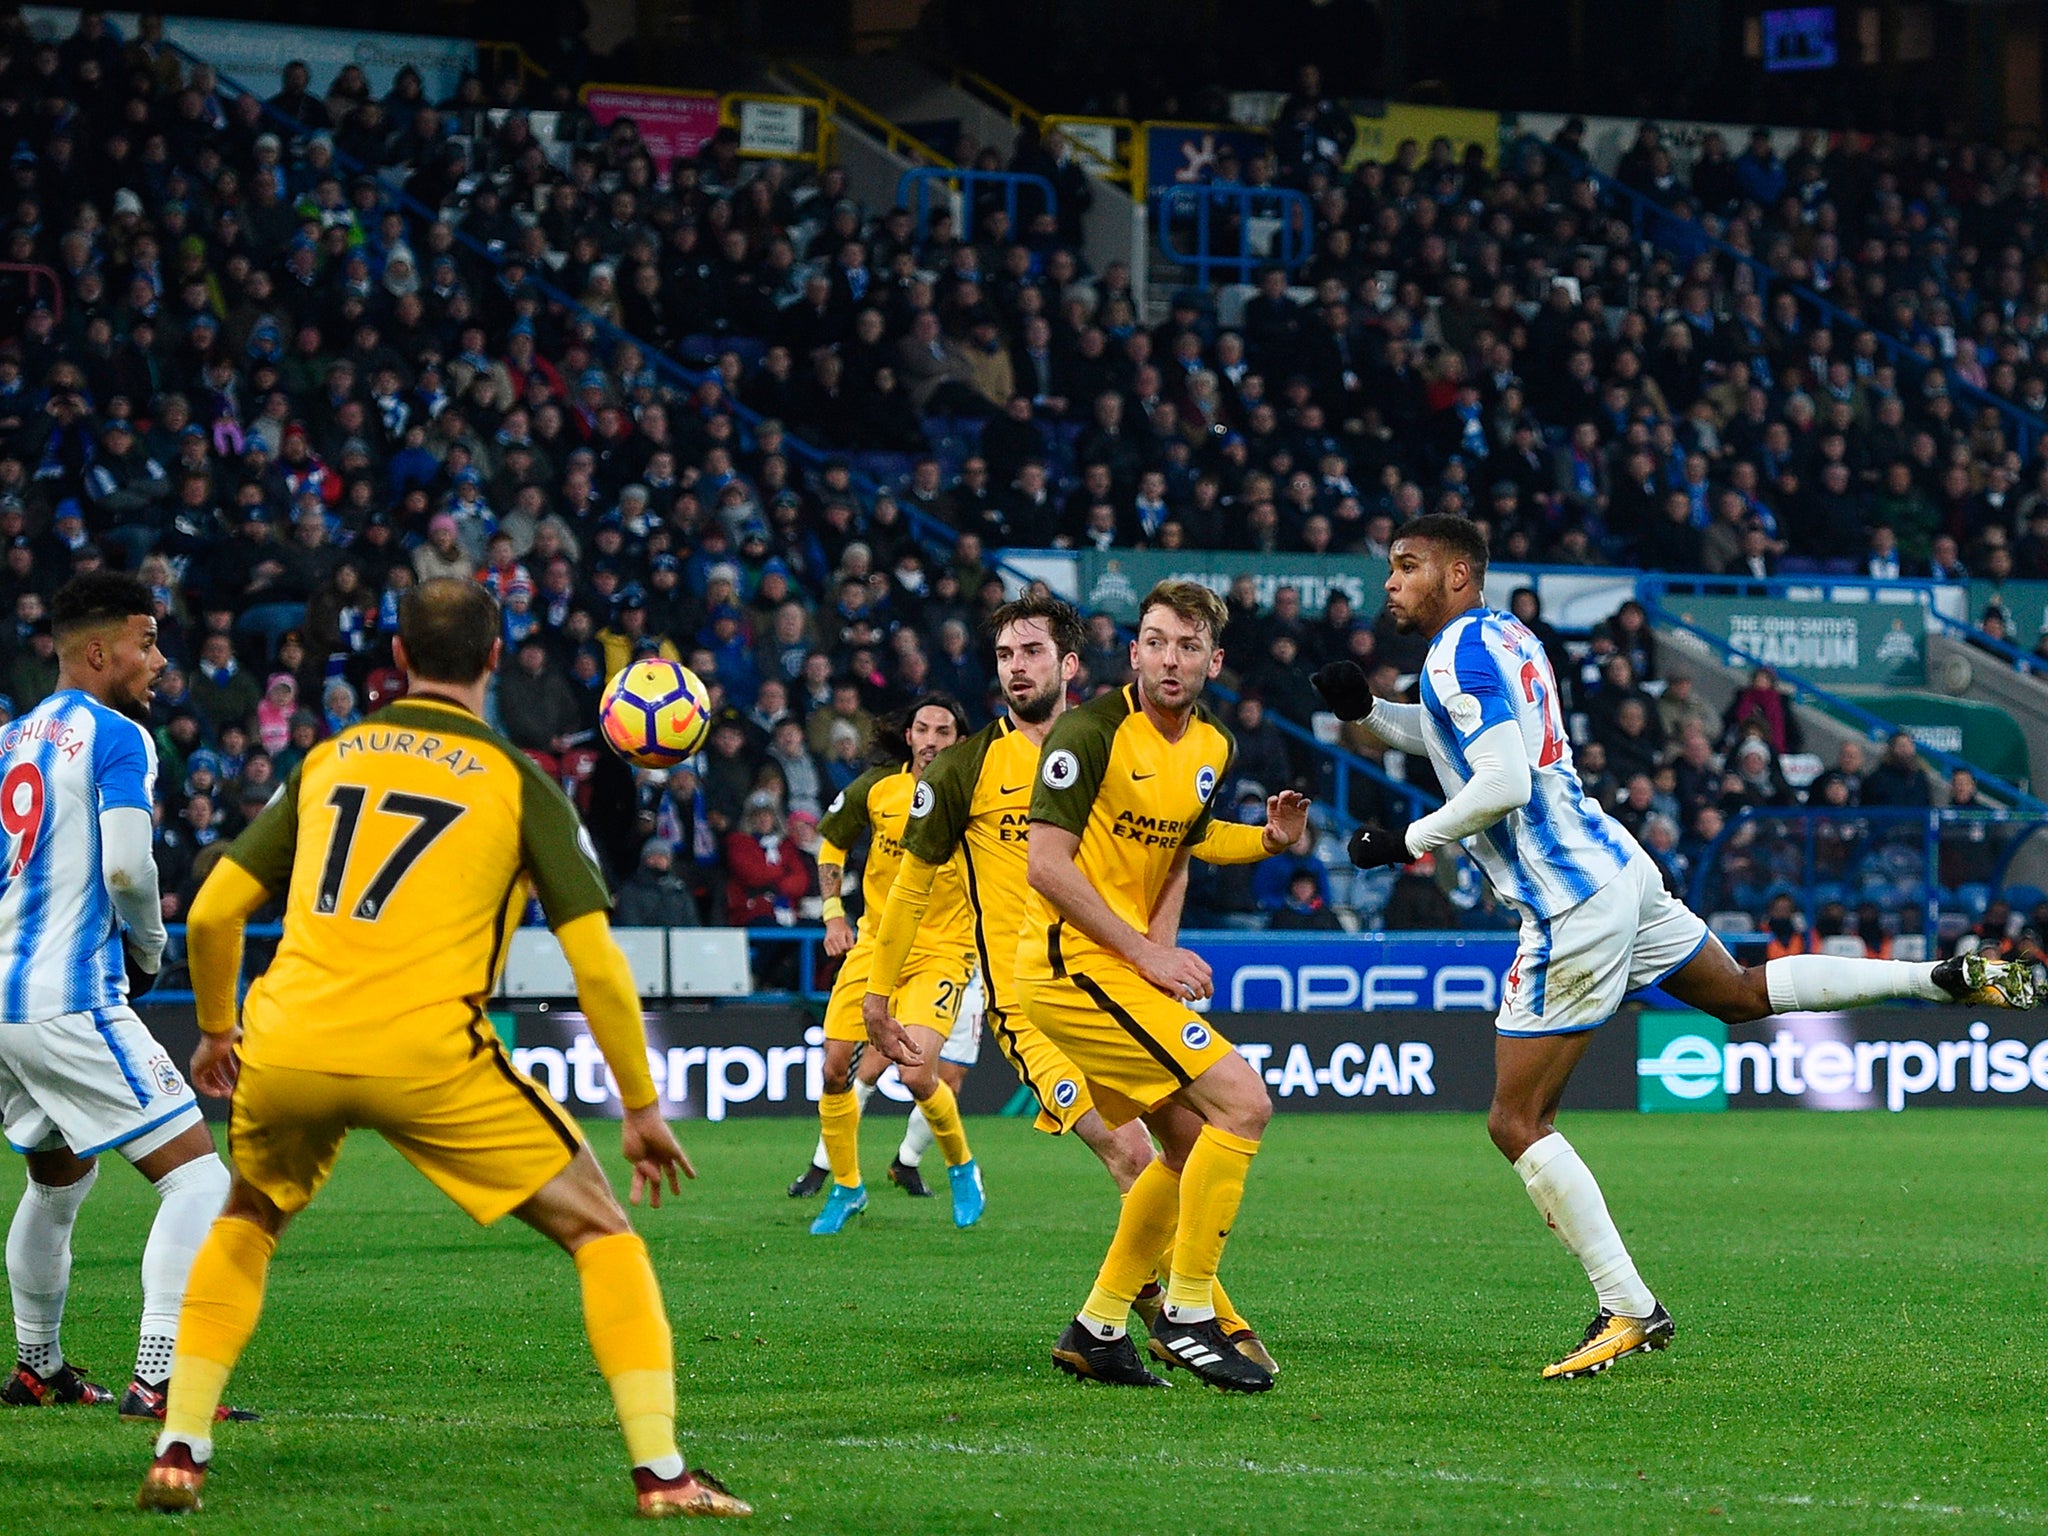 Mounie heads in his and Huddersfield's second goal